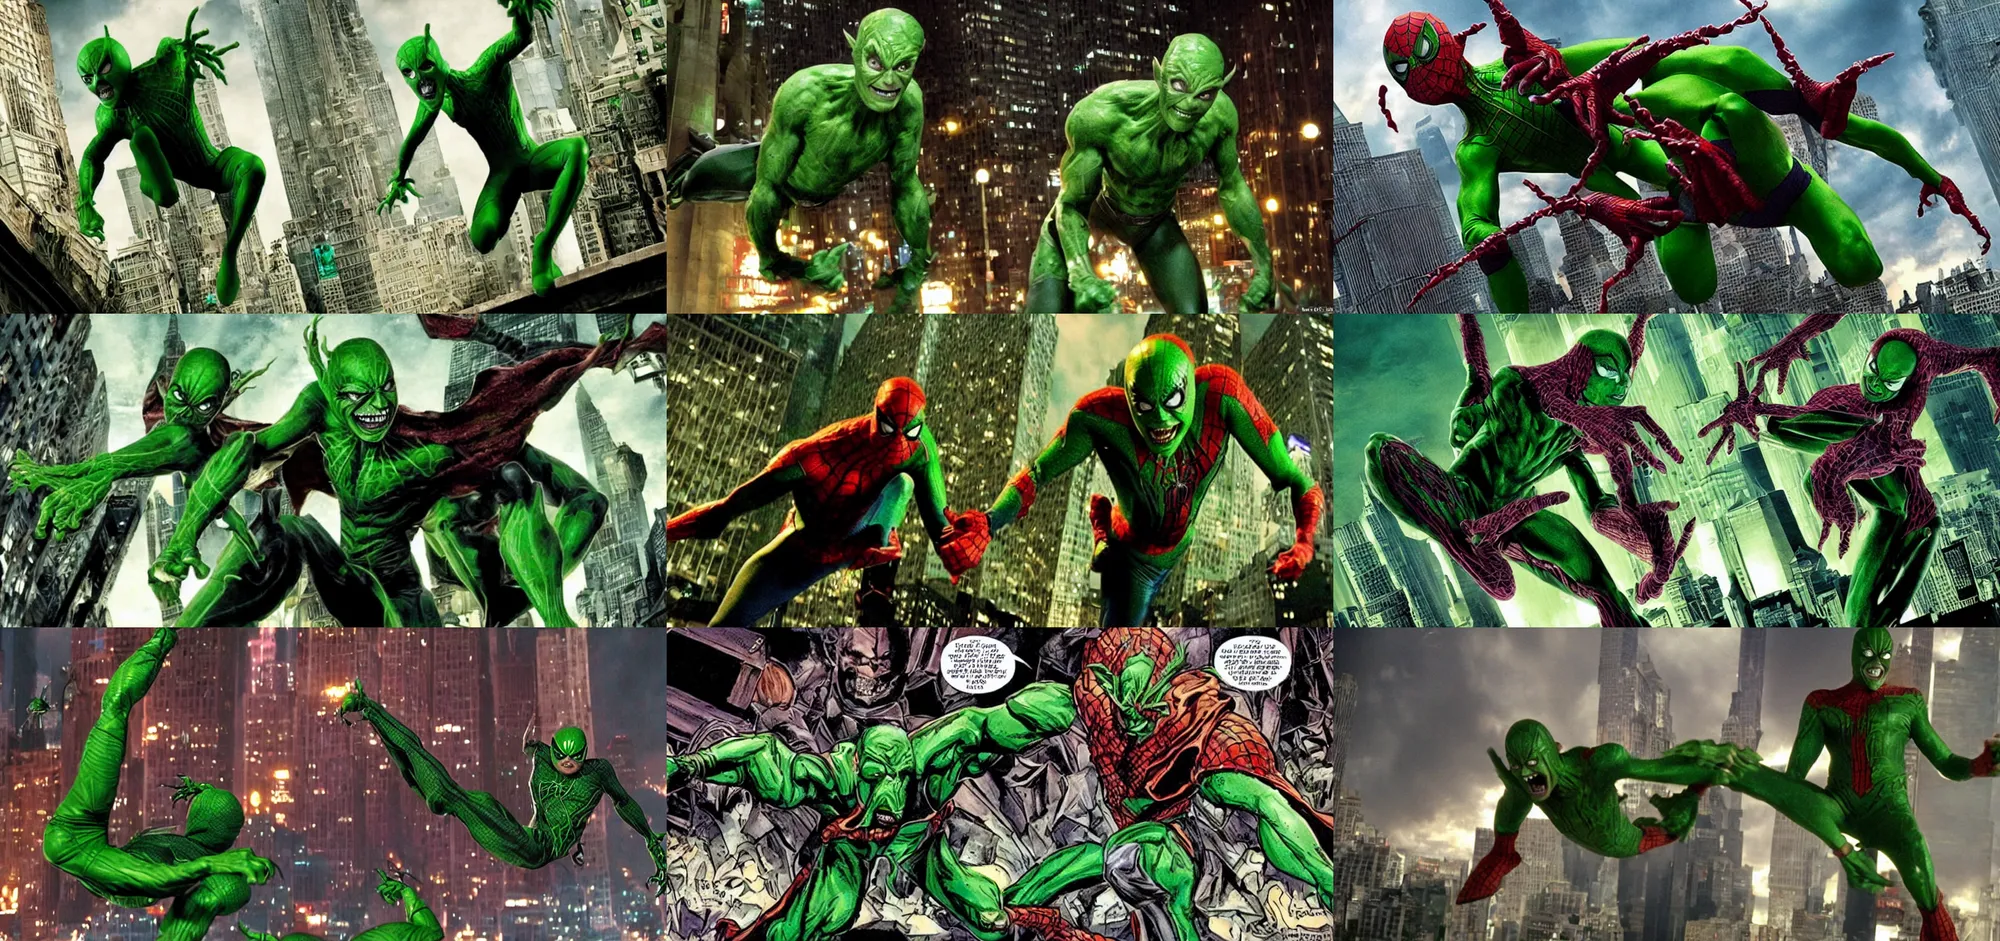 Prompt: green goblin in a spider man movie scene from the movie